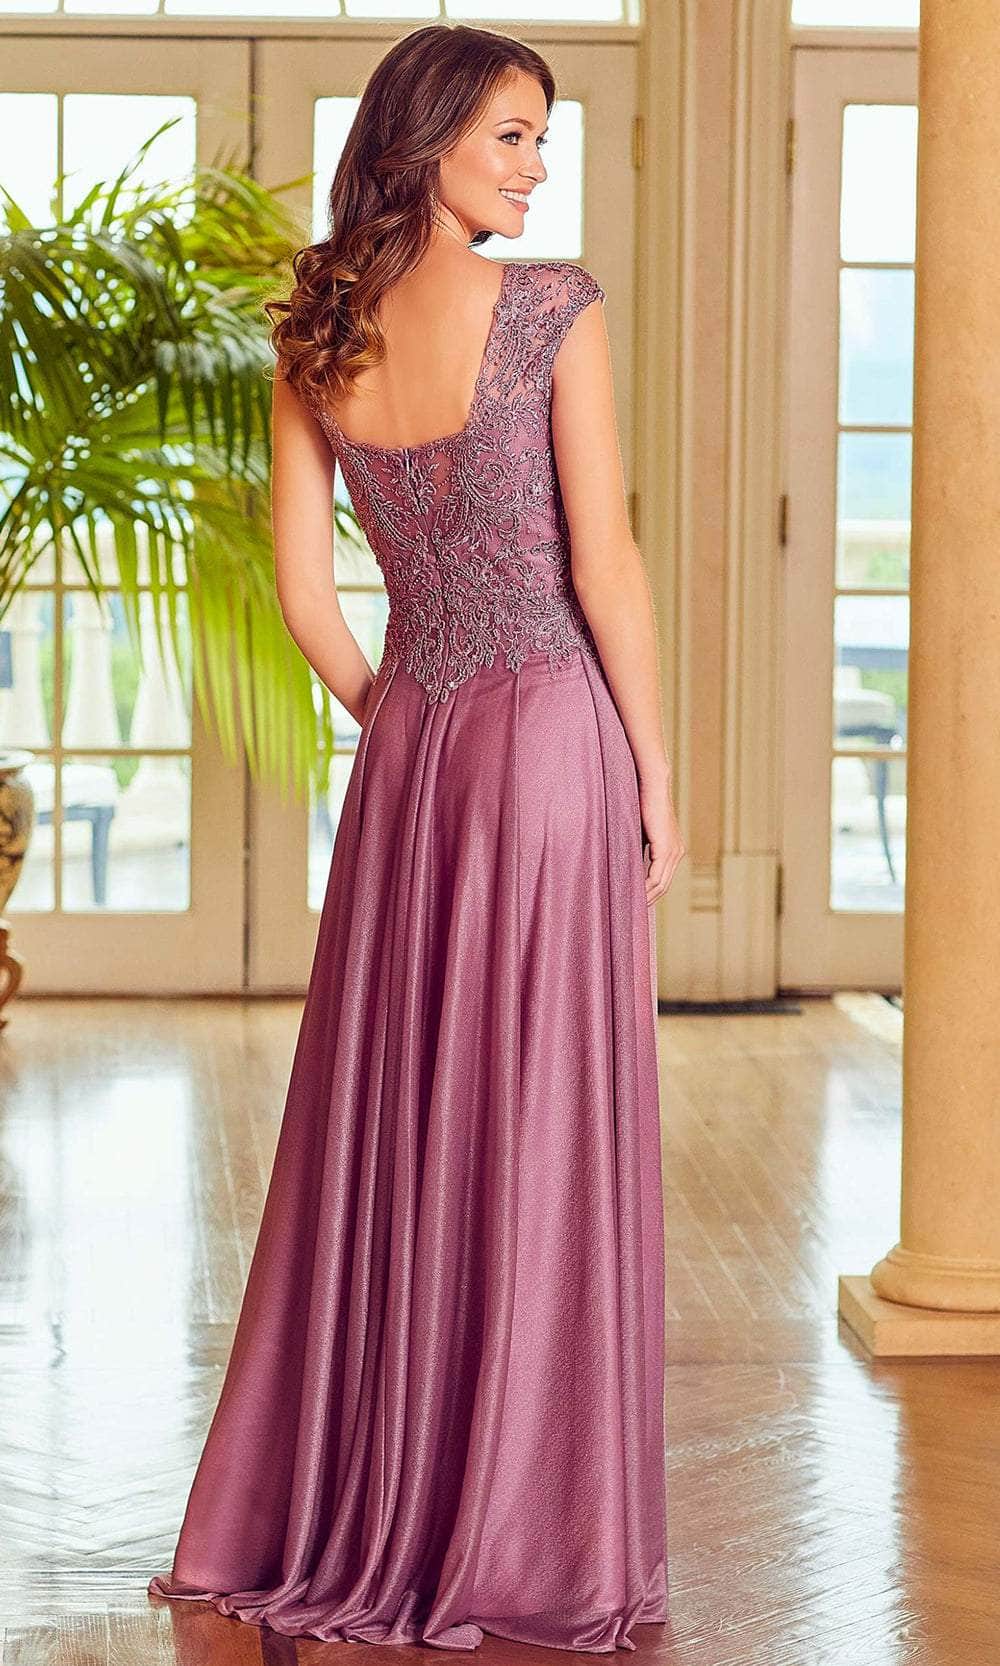 Mori Lee 72520 - Illusion Neckline Embellished Bodice Evening Gown Mother of the Bride Dresses